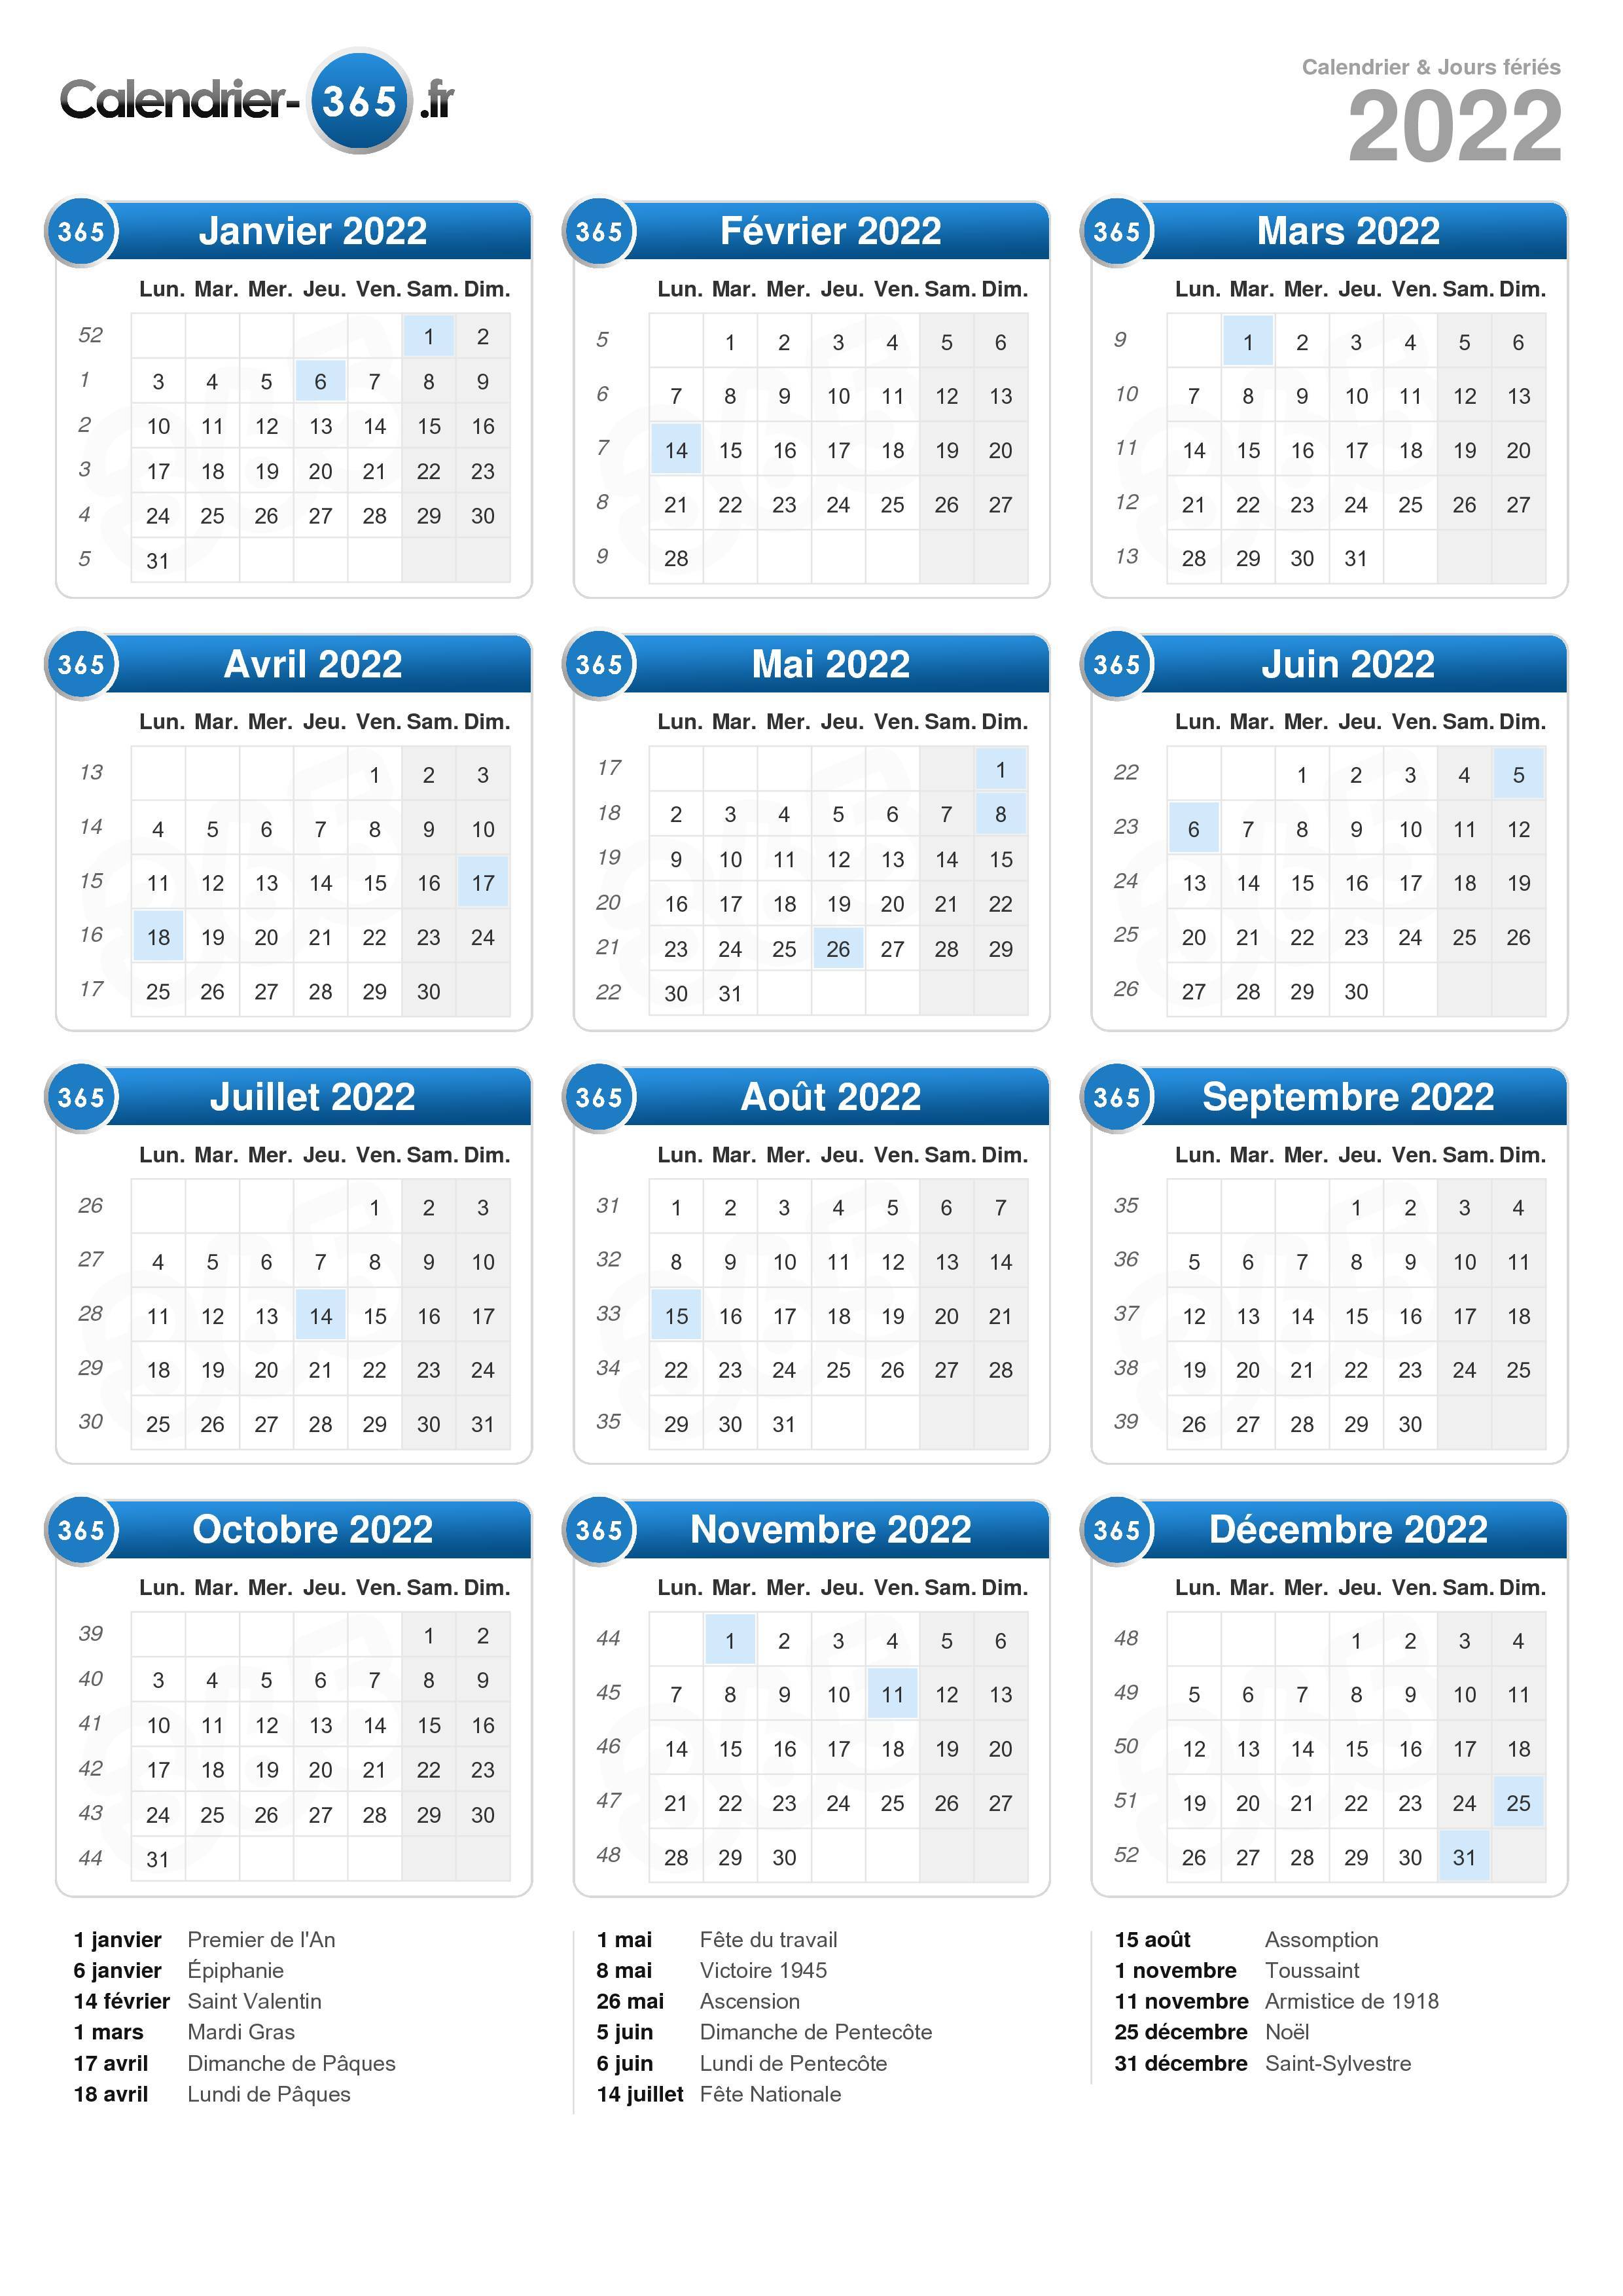 Calendrier 365 Jours 2022 Calendrier 2022